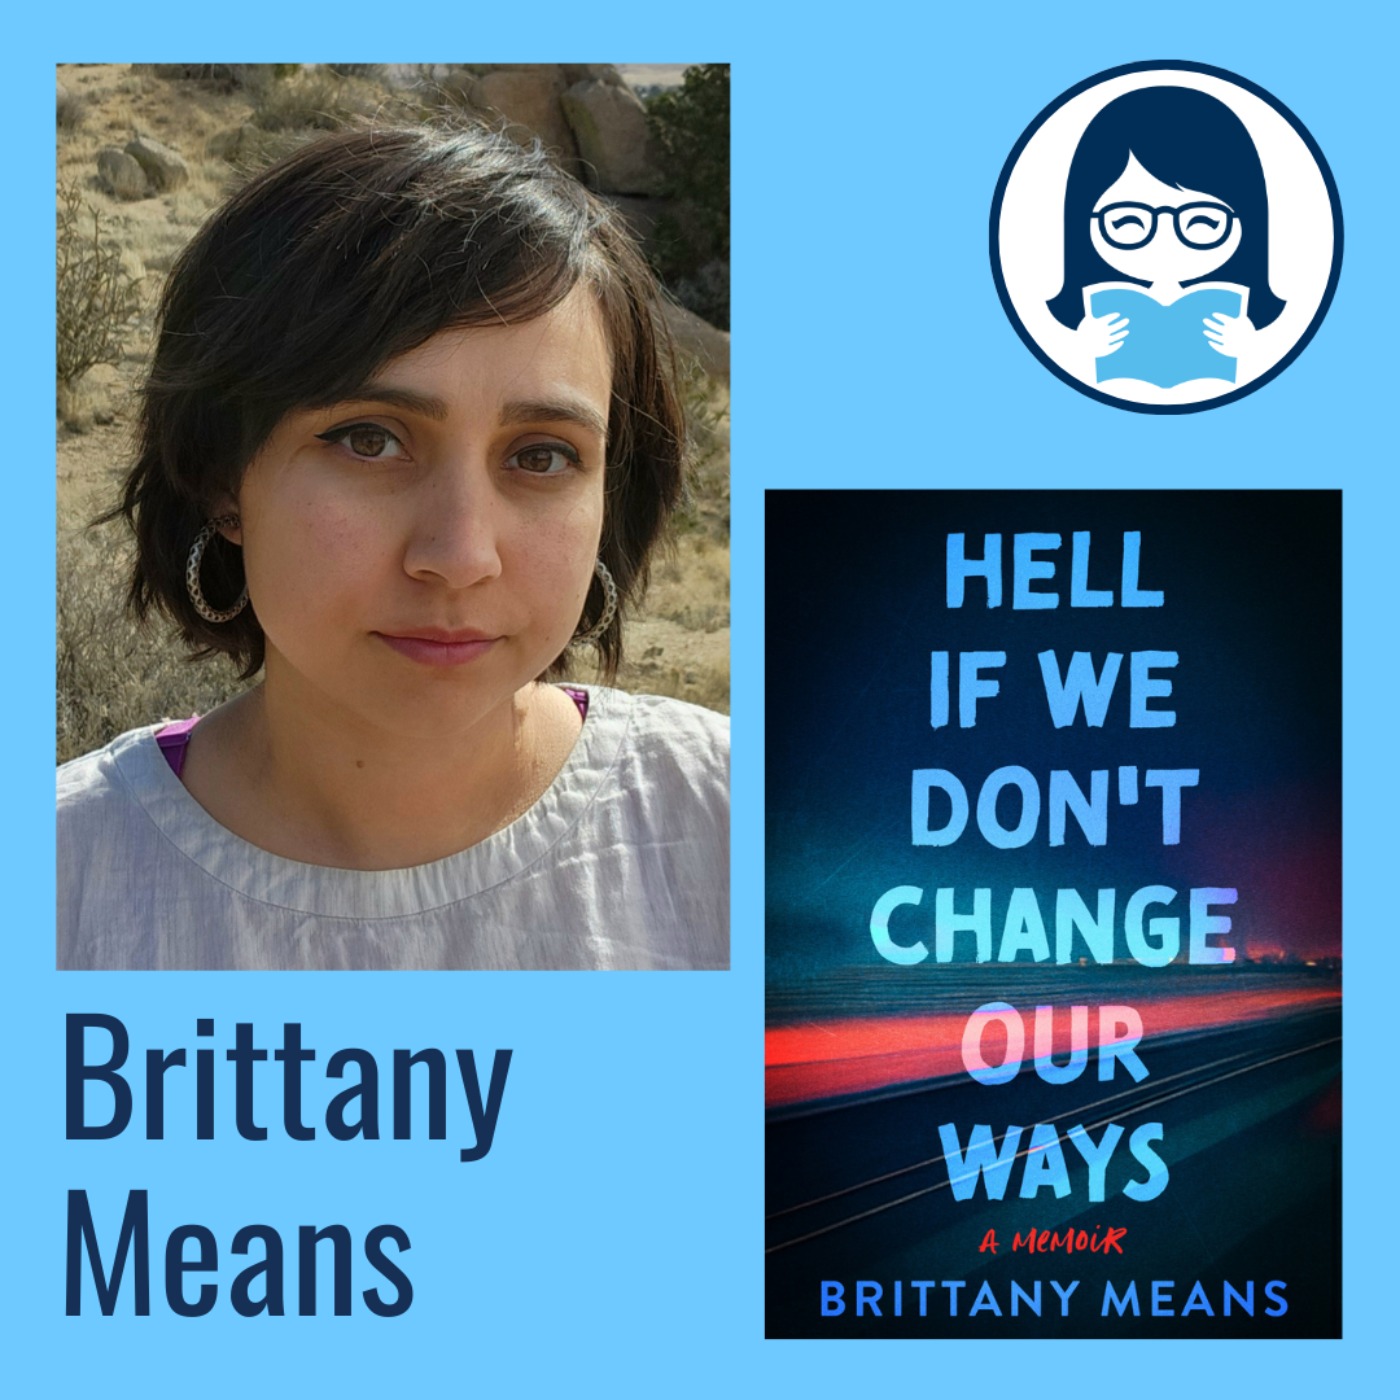 Brittany Means, HELL IF WE DON'T CHANGE OUR WAYS: A Memoir